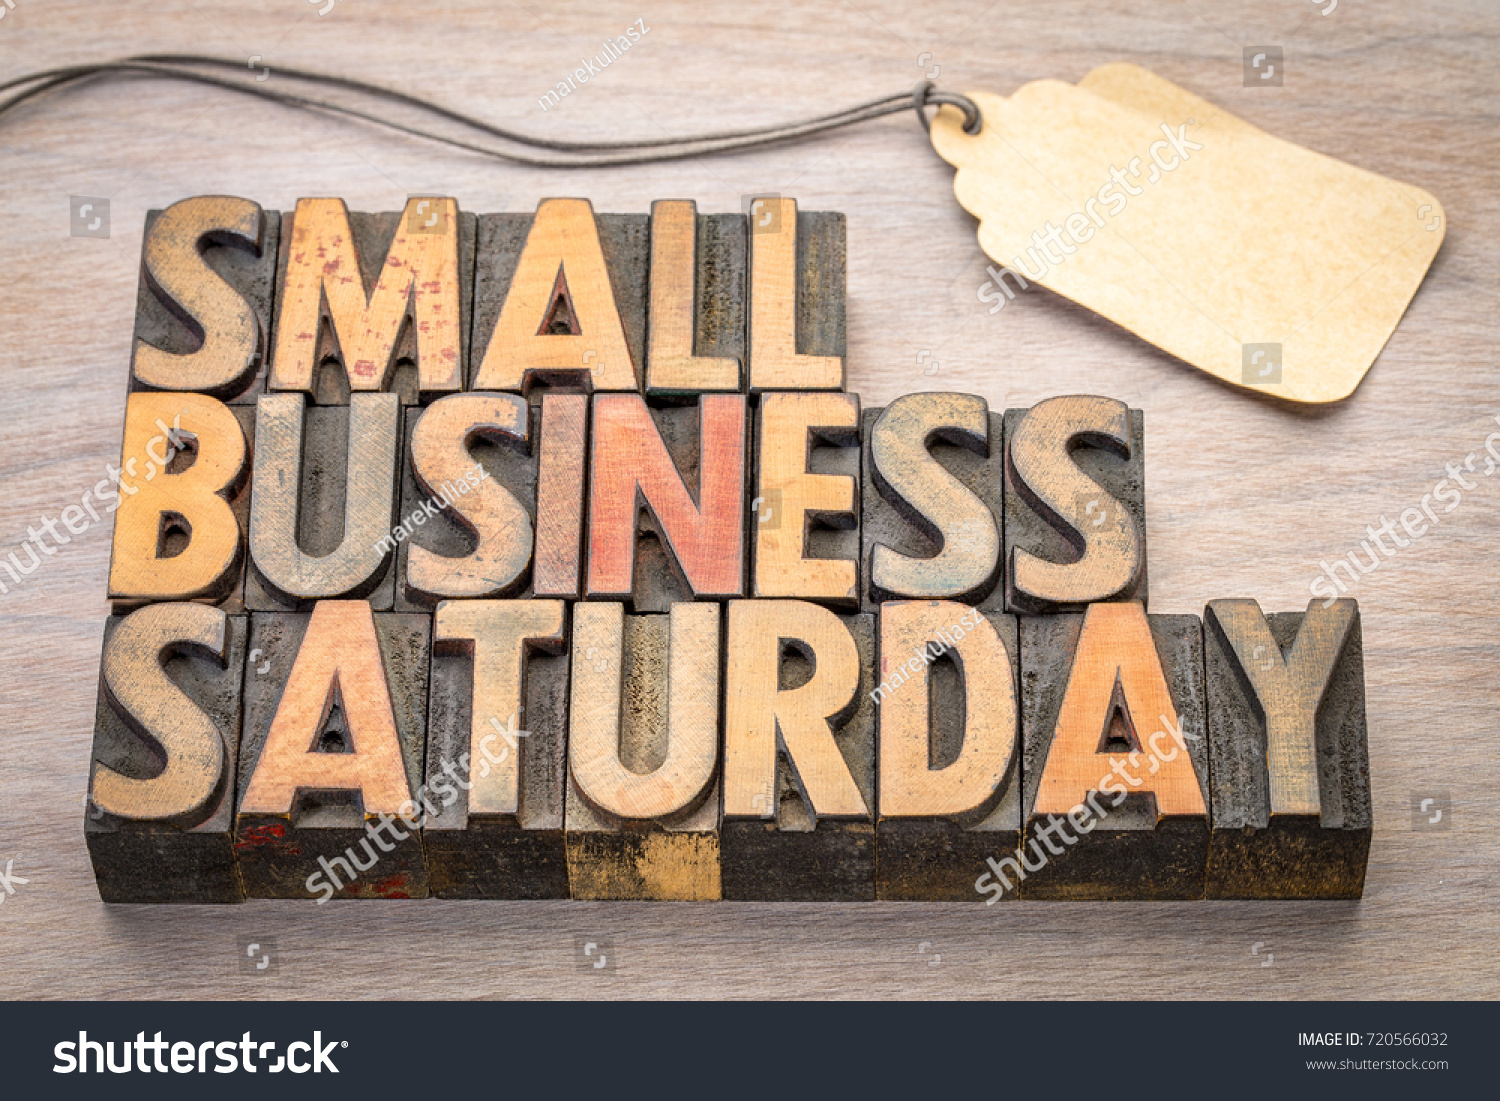 Small Business Saturday word abstract - text in vintage letterpress wood type with a blank price tag, holiday shopping concept #720566032